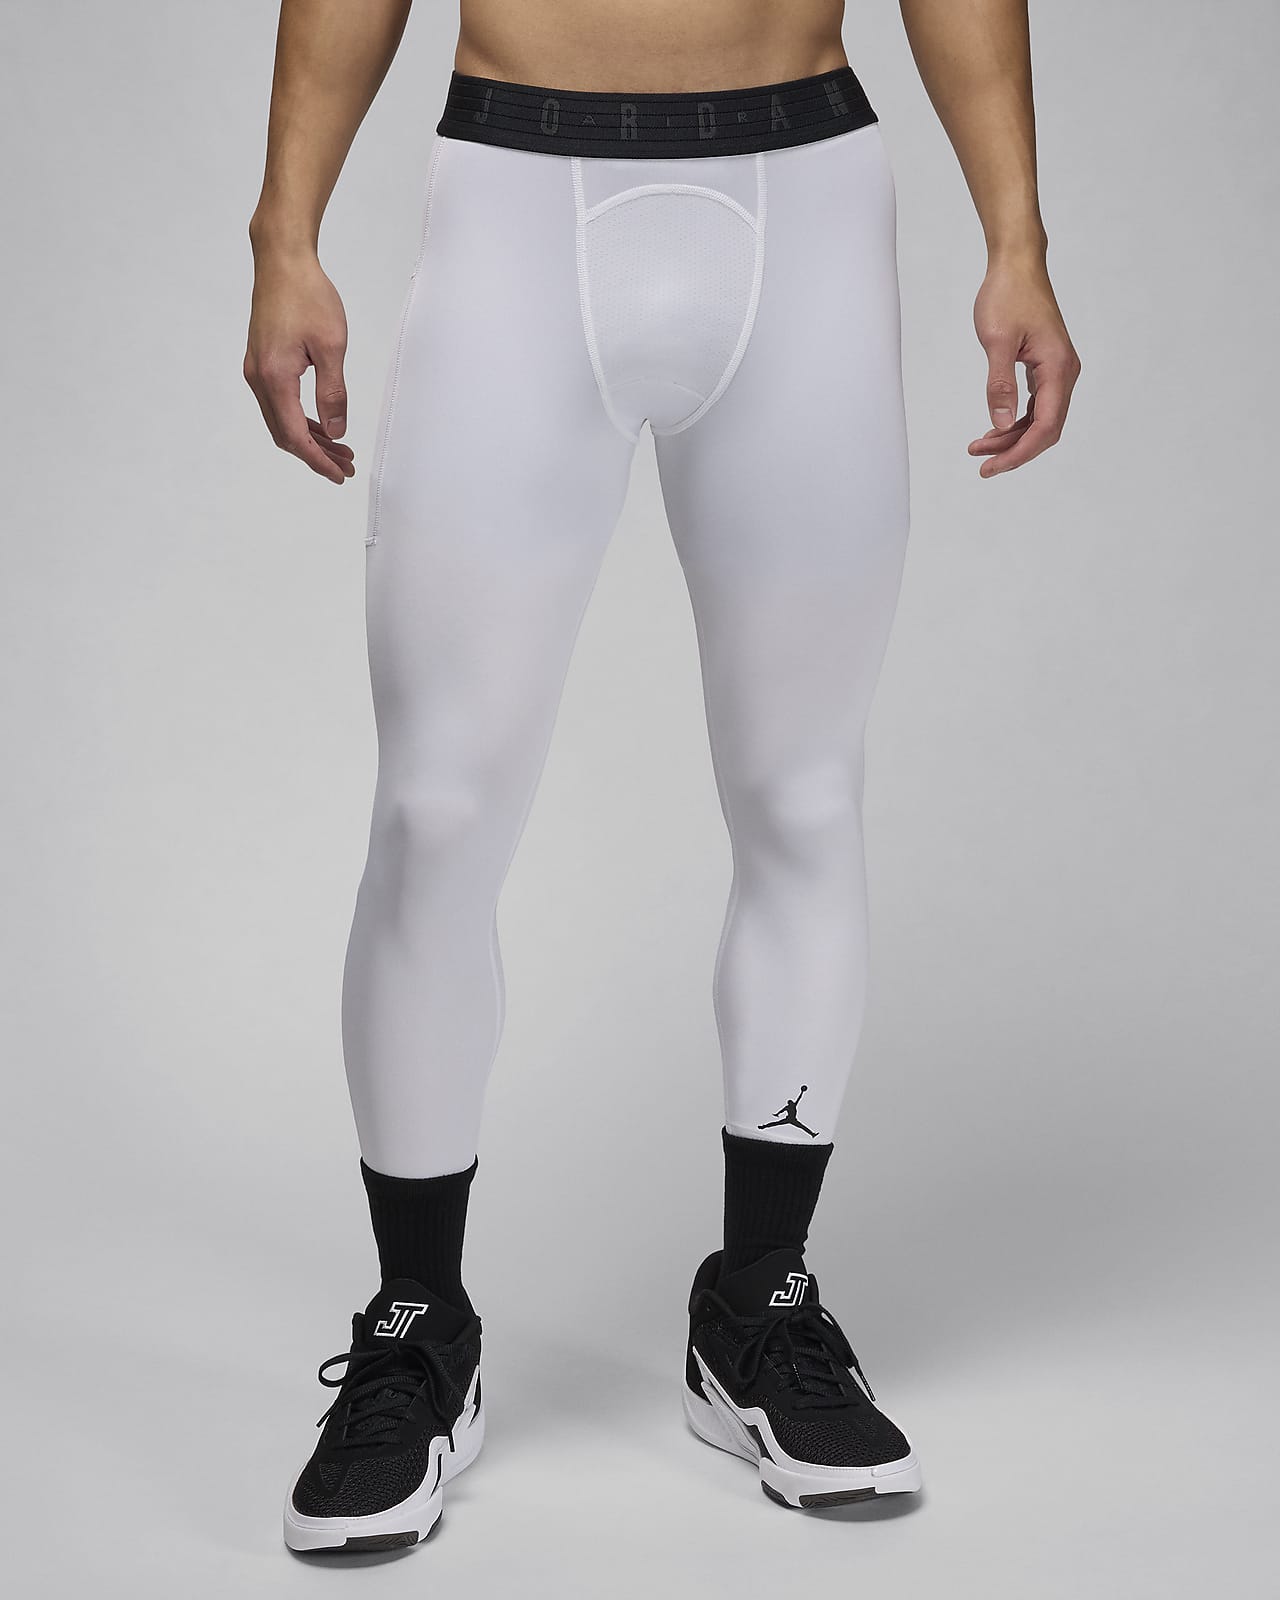 Men's One Leg Tights Legging 3/4 Compression Pants Athletic Base Quick  Drying Underwear For Basketball Running Cycling